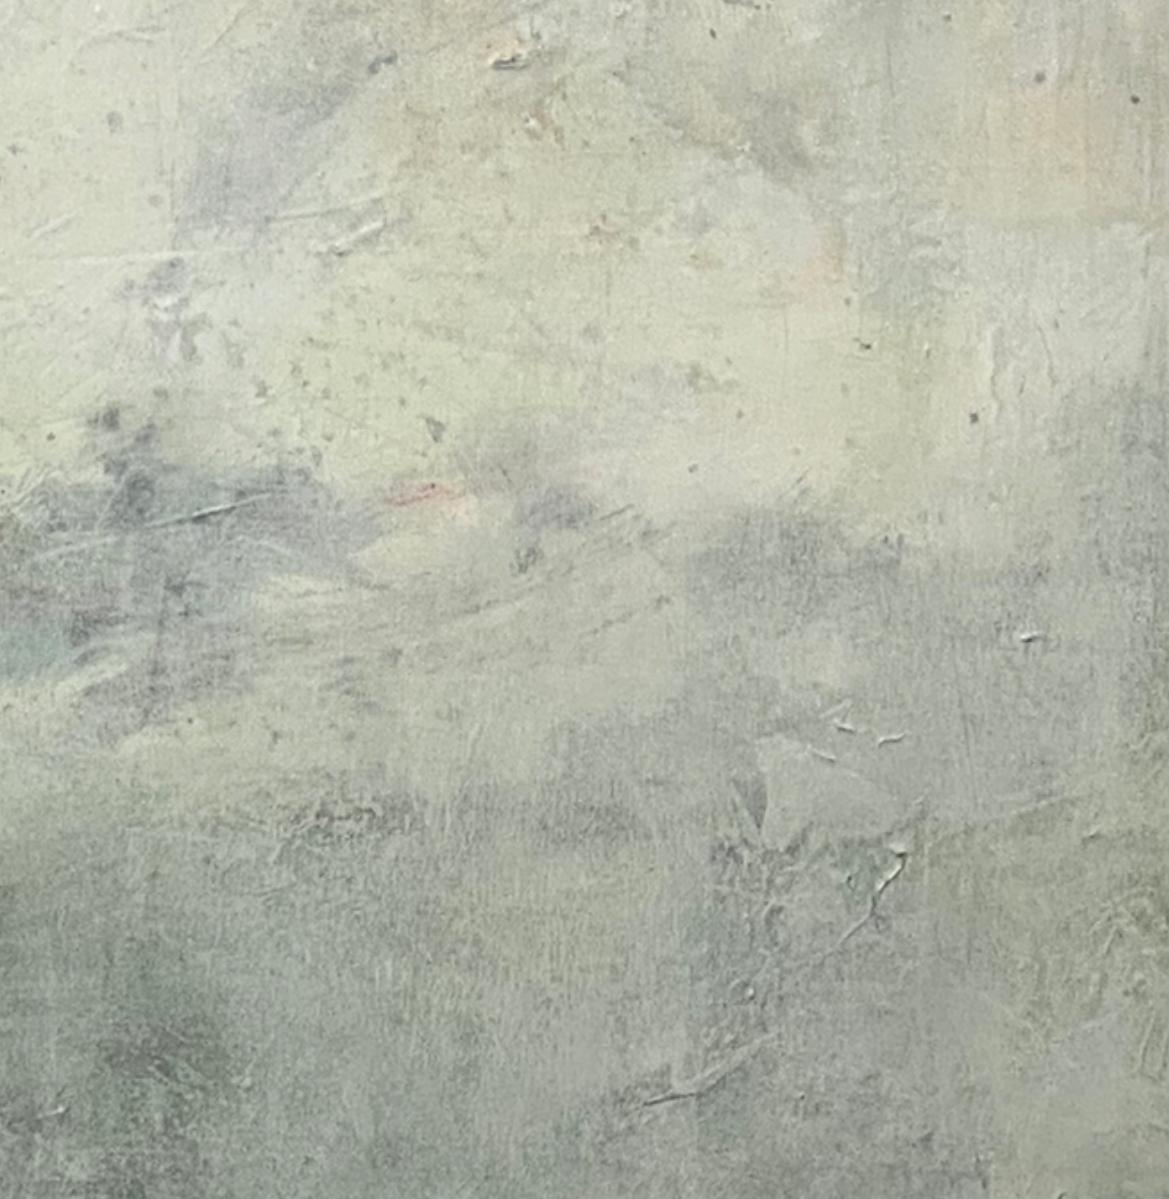 It was a misty day, Contemporary landscape, seafoam, ethereal abstract,   For Sale 4